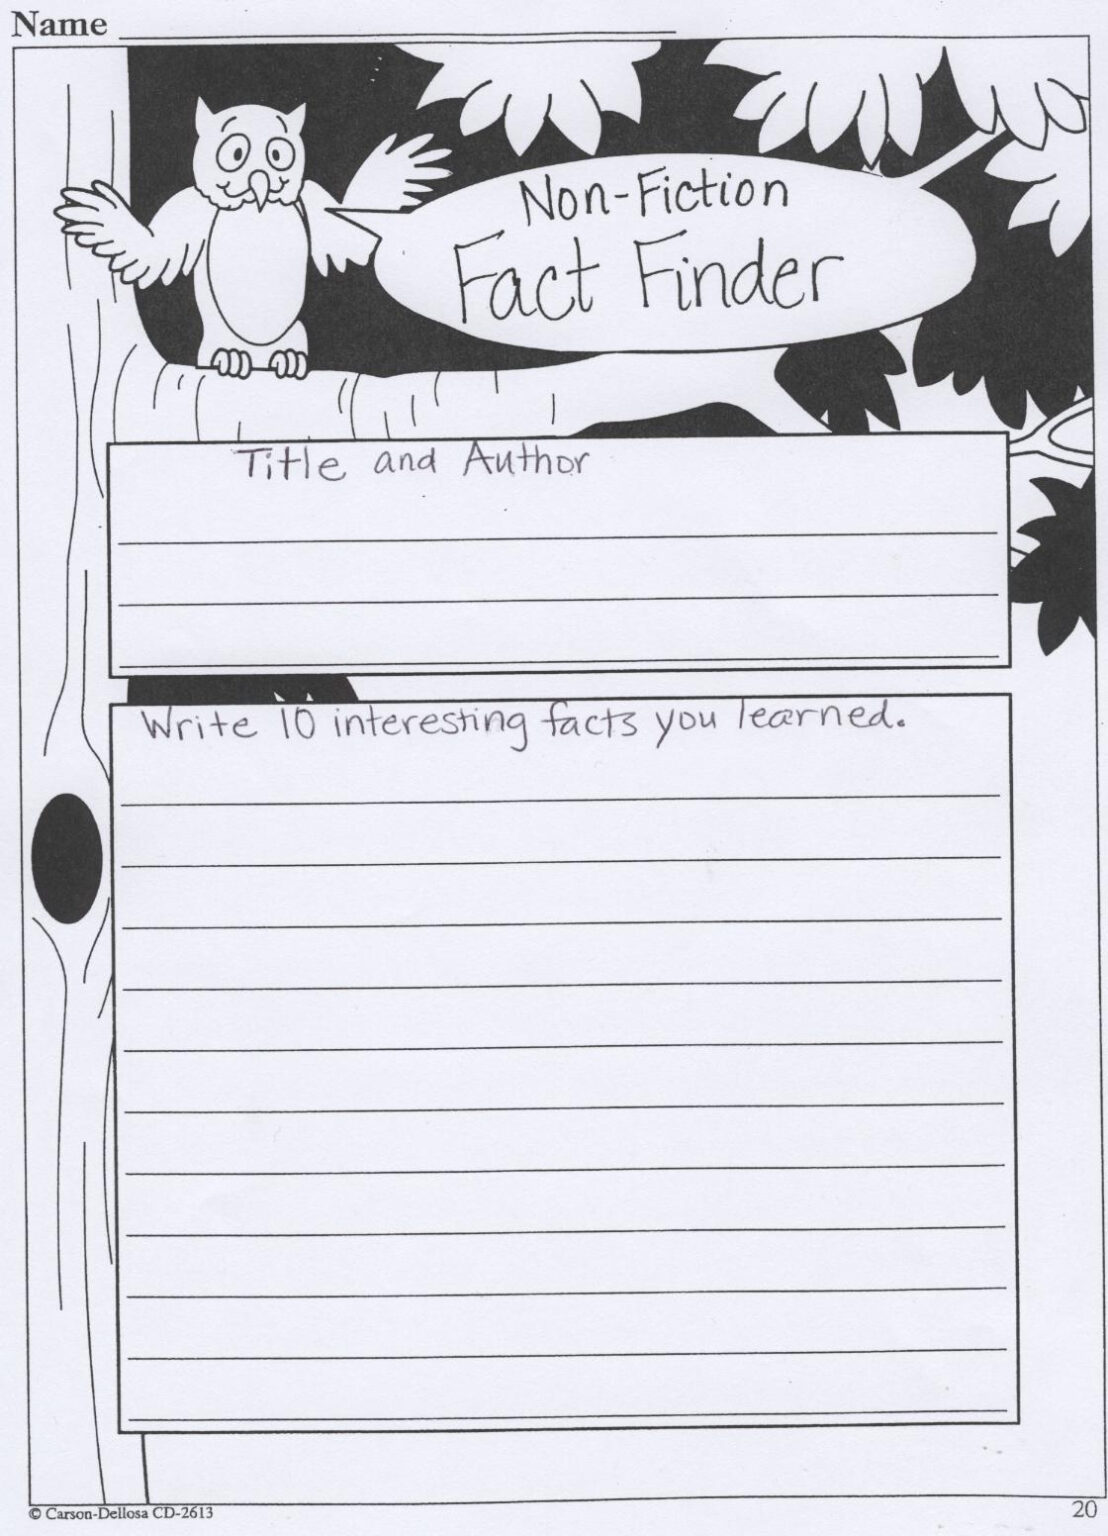 nonfiction articles for 5th grade